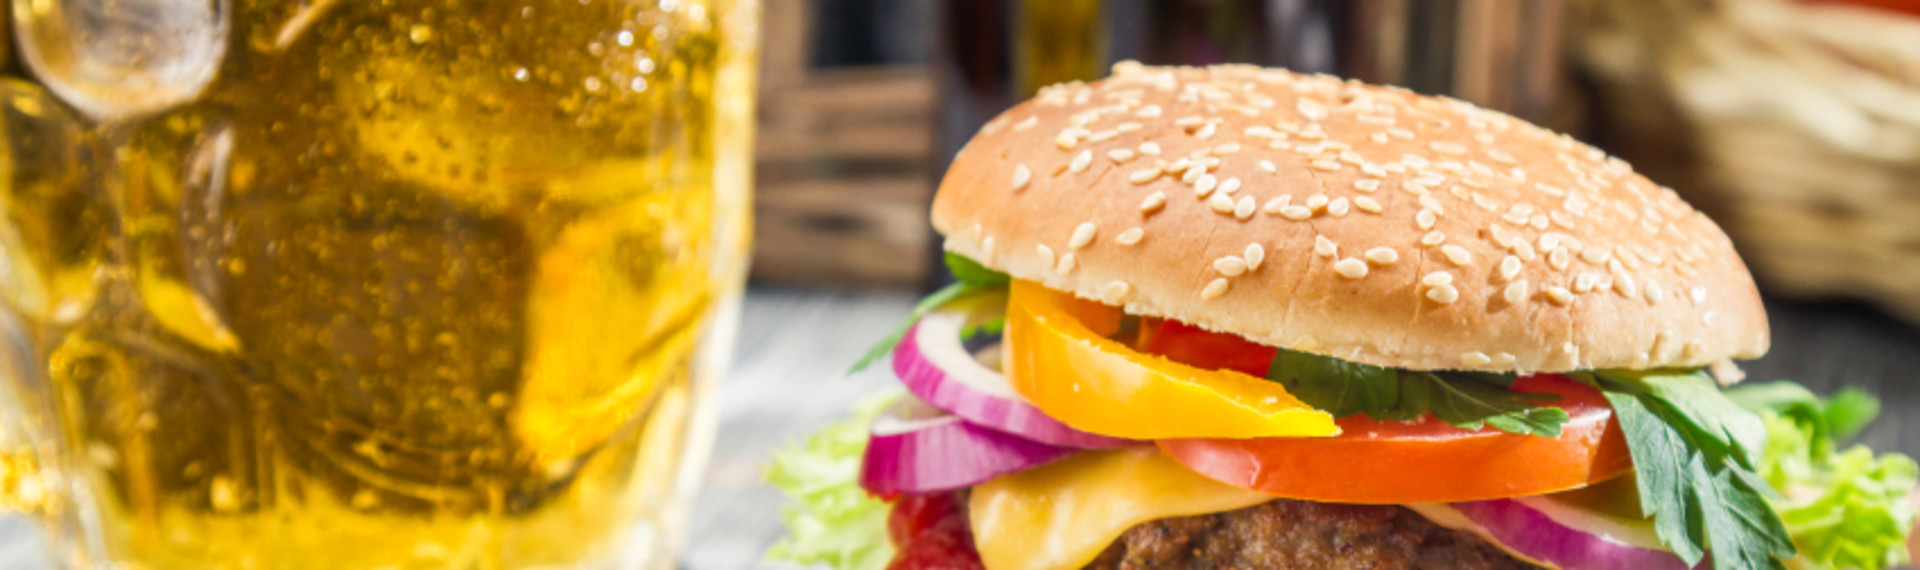 Local Beer and Burger Tallinn | Pissup Tours